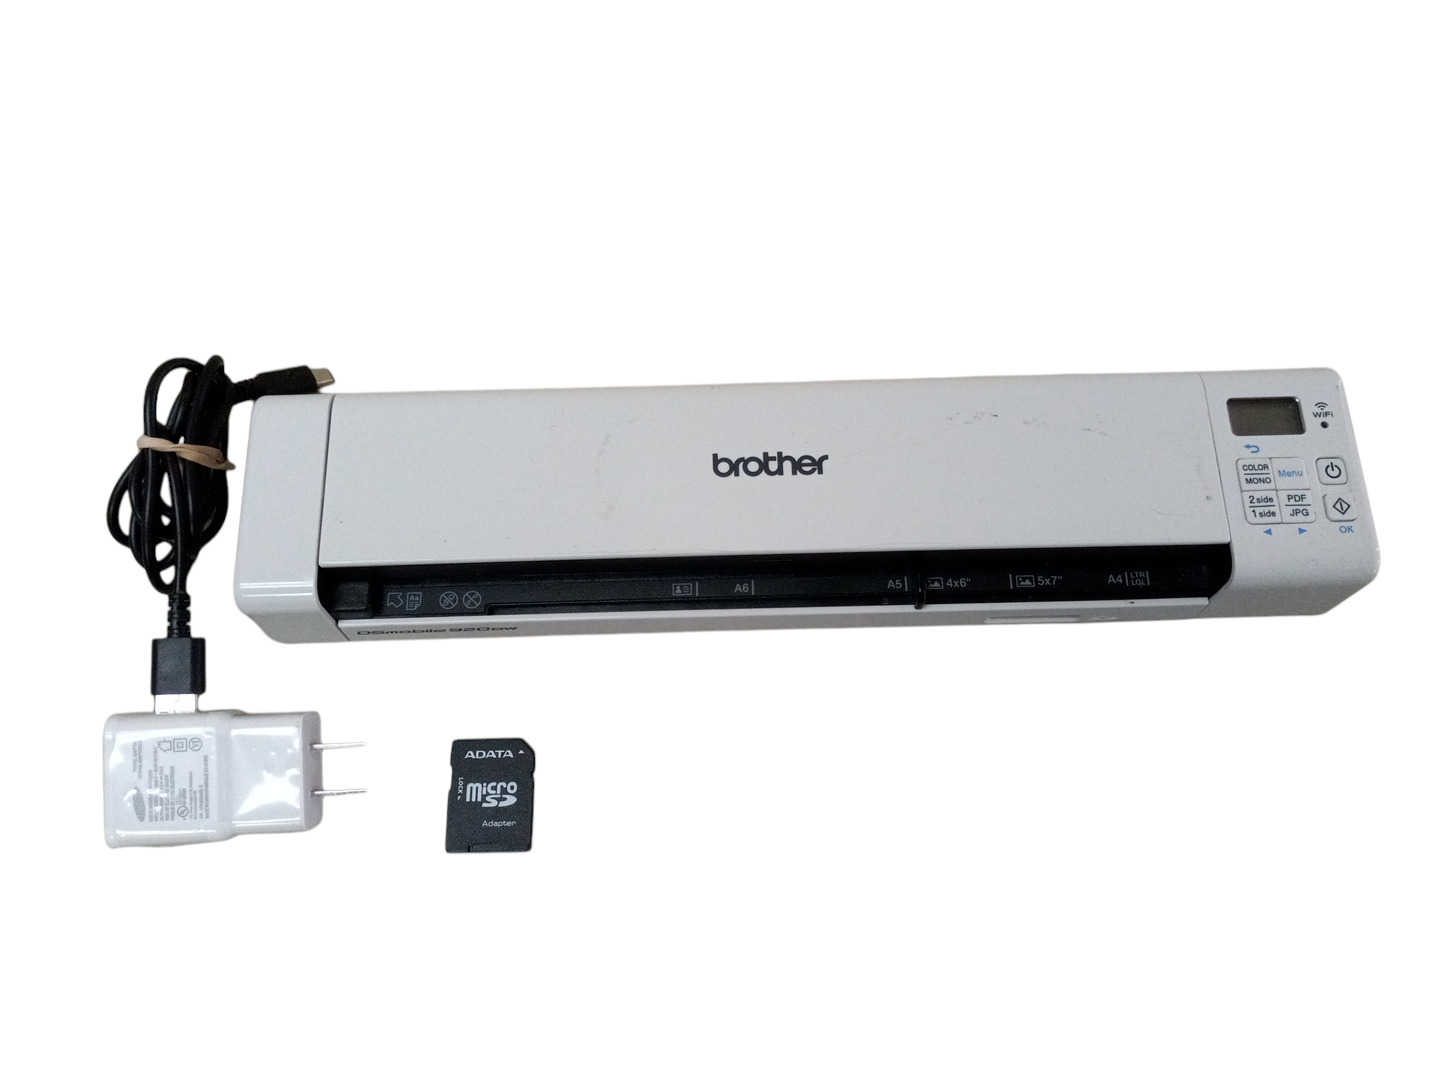 Brother DSmobile 920DW Wireless Duplex Mobile Color Page Scanner